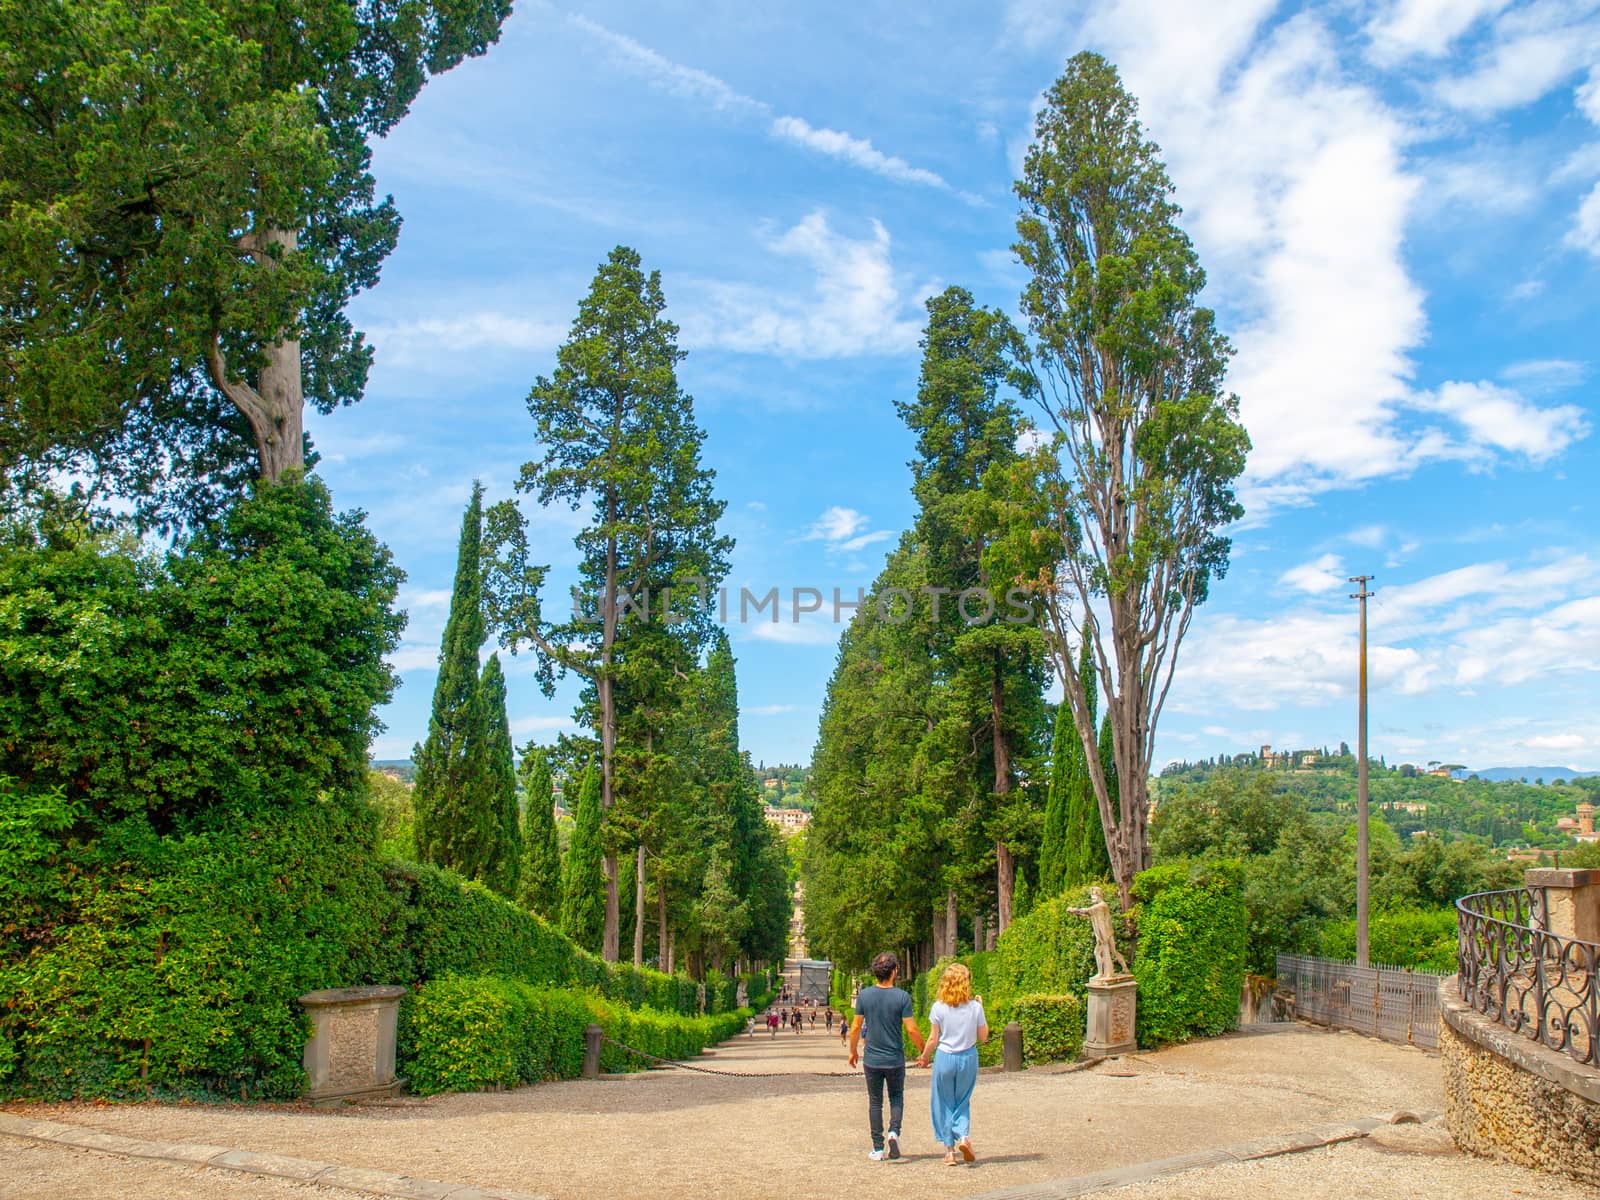 Young romantic pair in Boboli Gardens in Florence, Tuscany, Italy.